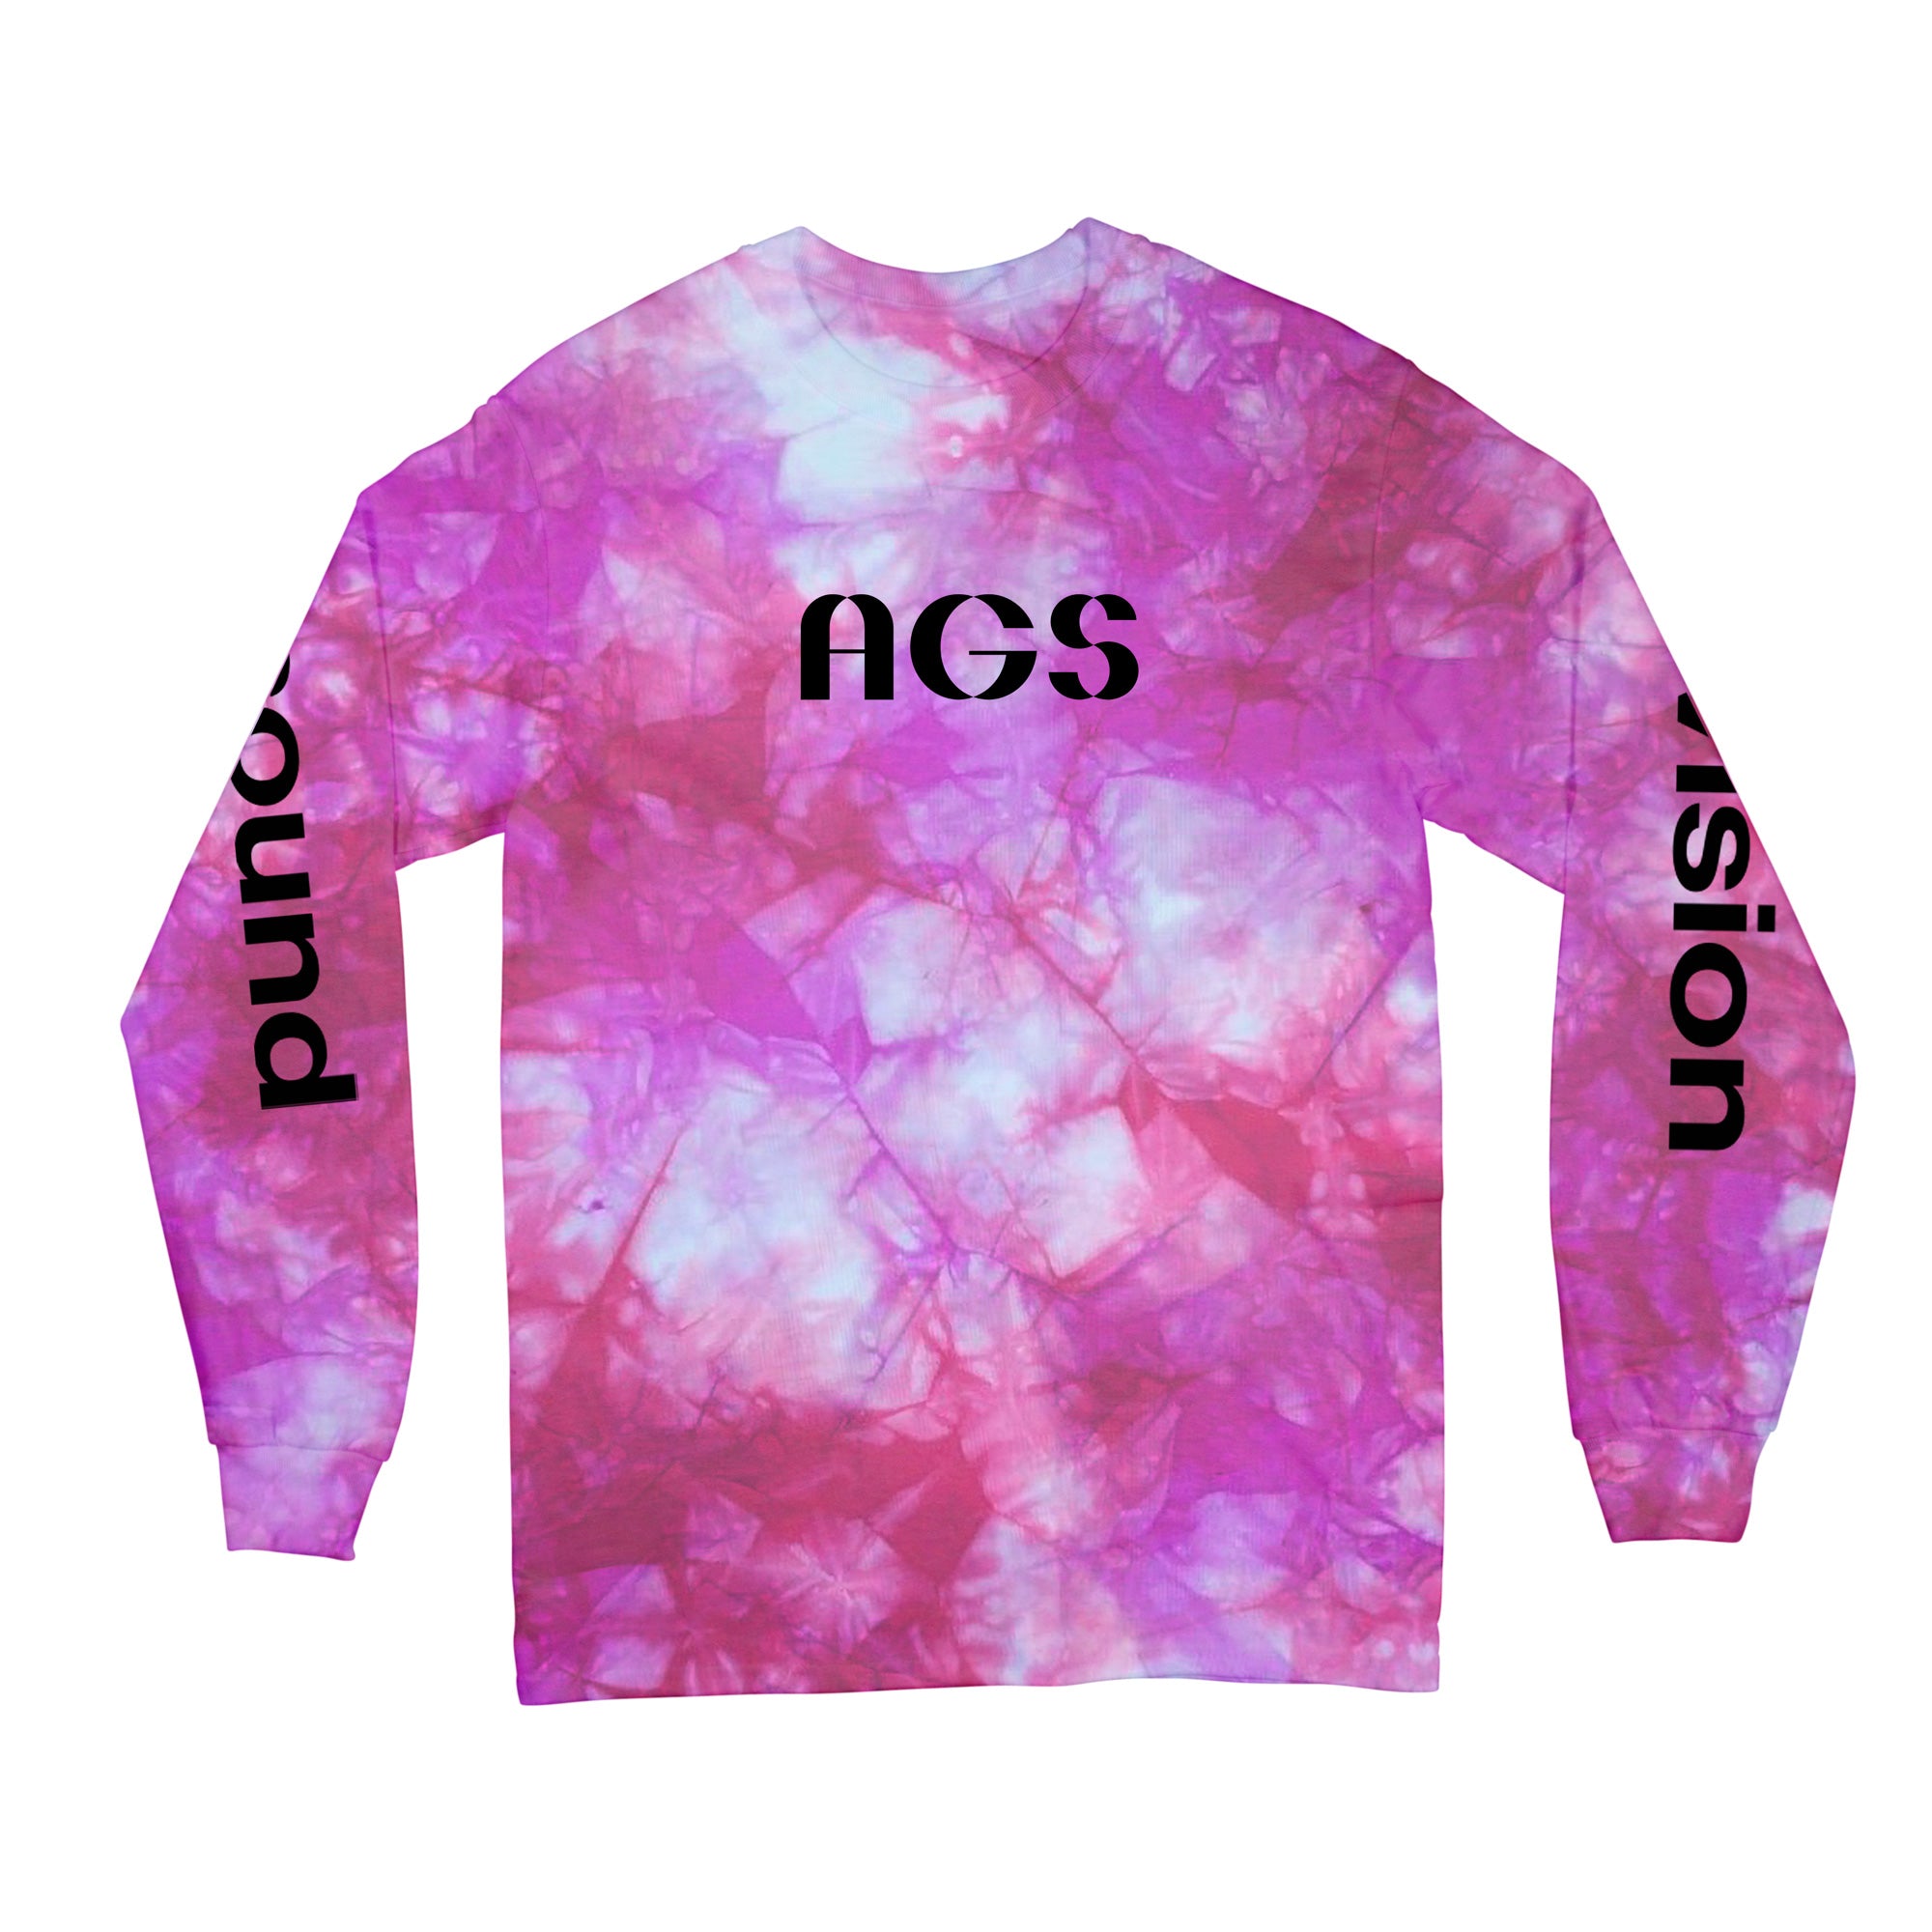 Sound Vision (Pink/Red Tie Dye) Long Sleeve Shirt